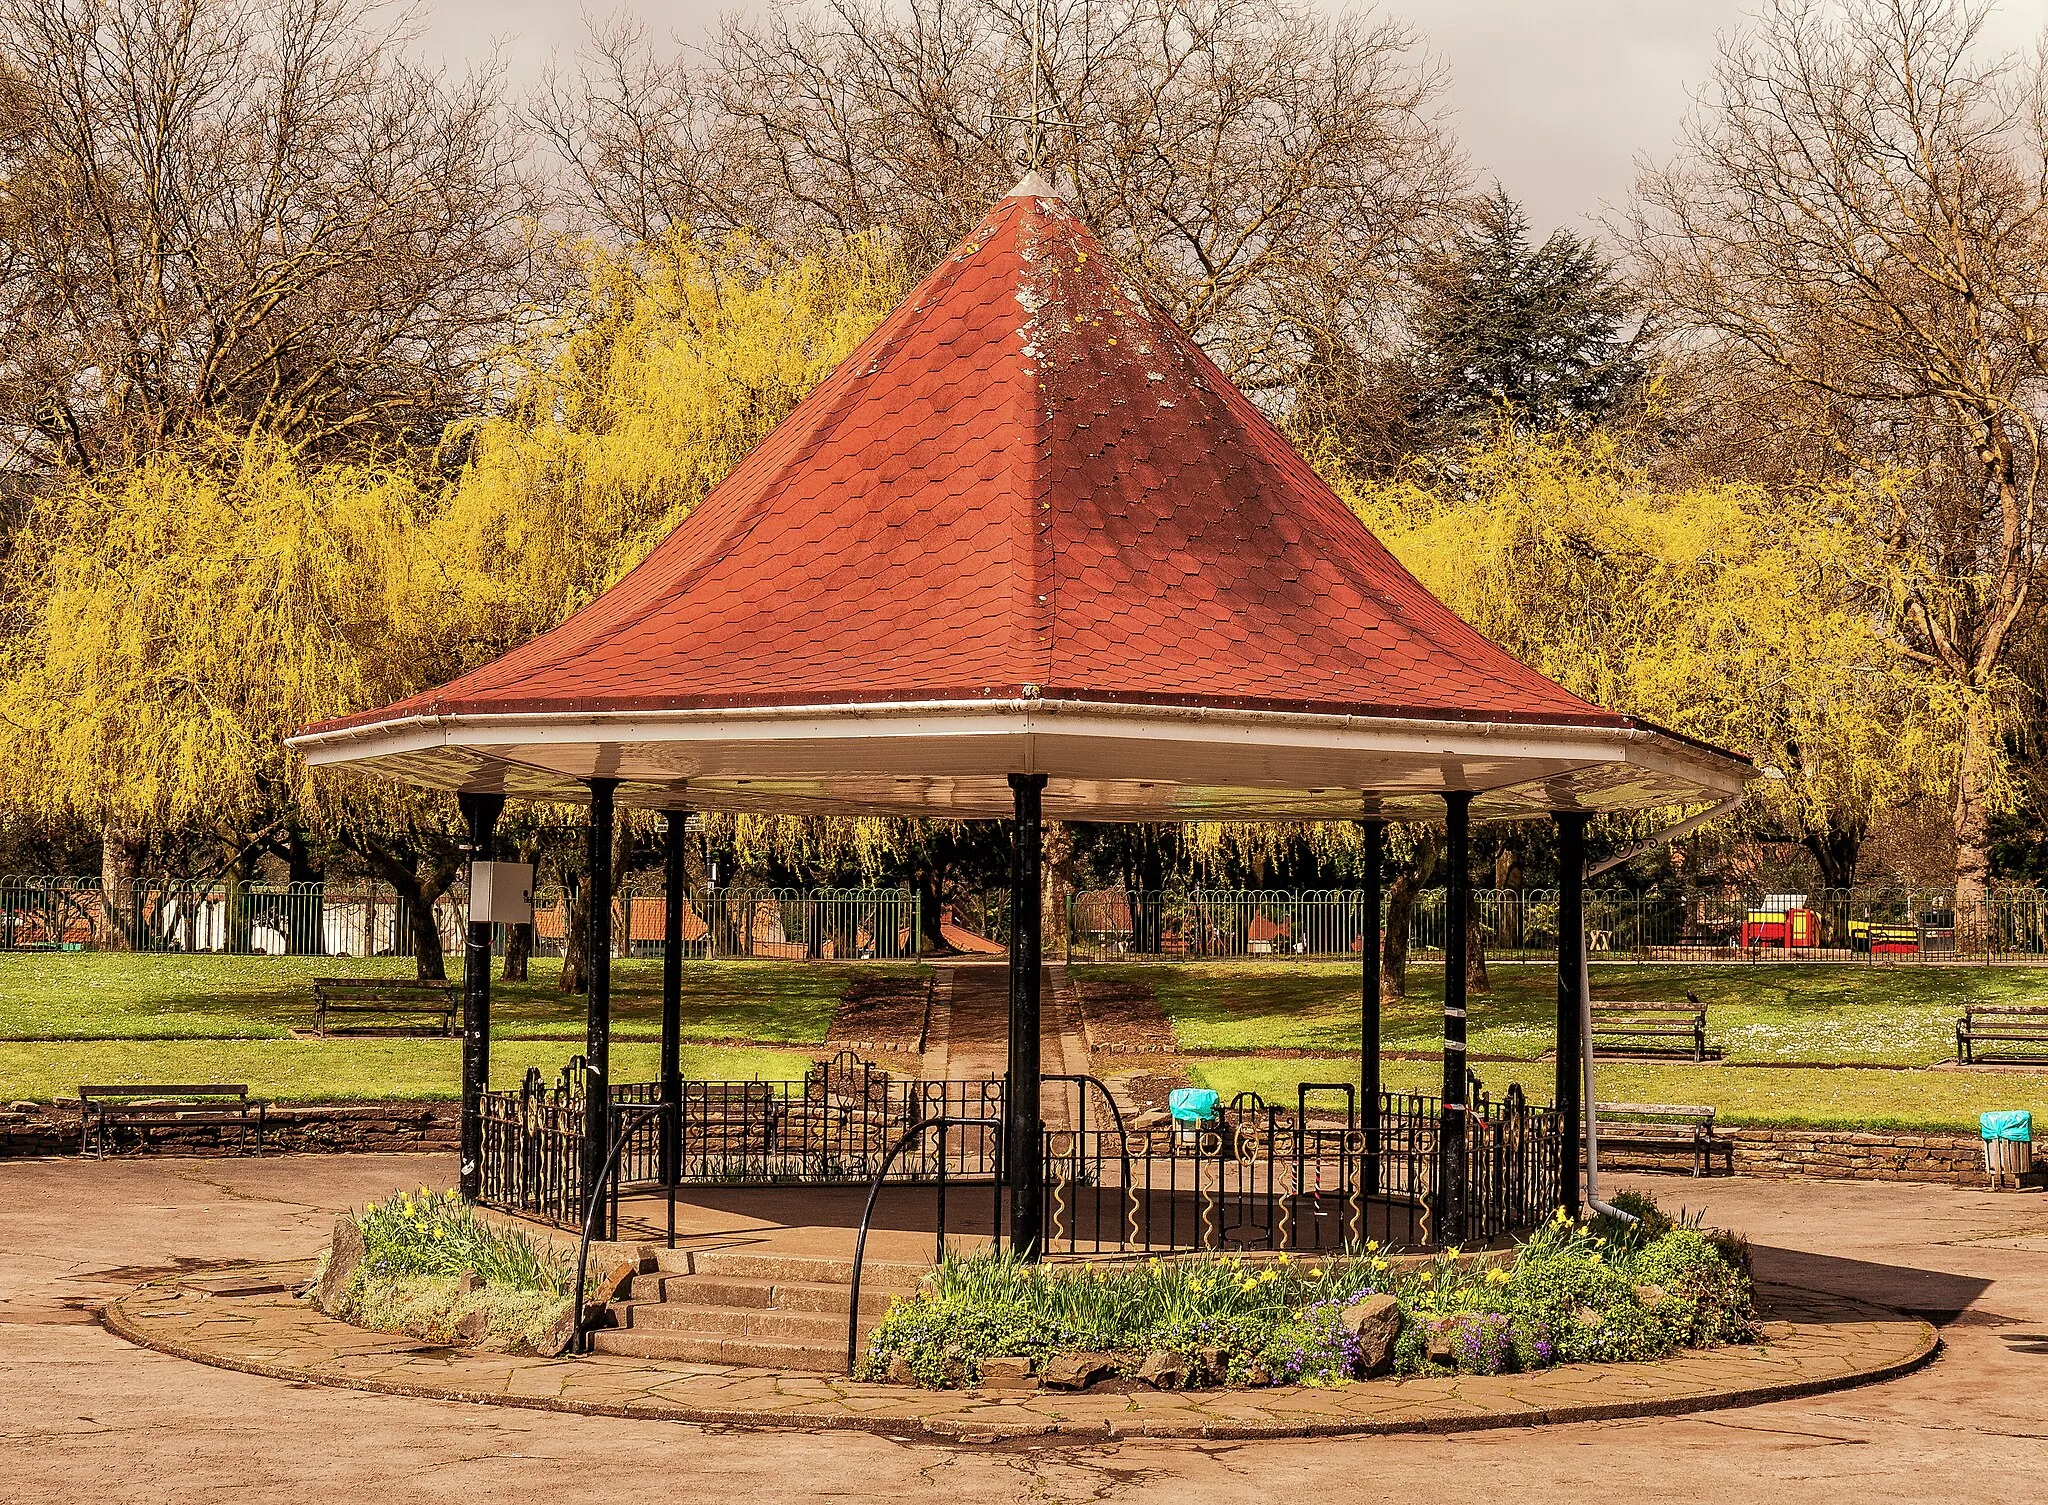 Photo showing: The bandstand in Ynysangharad Park, Pontypridd, south Wales.